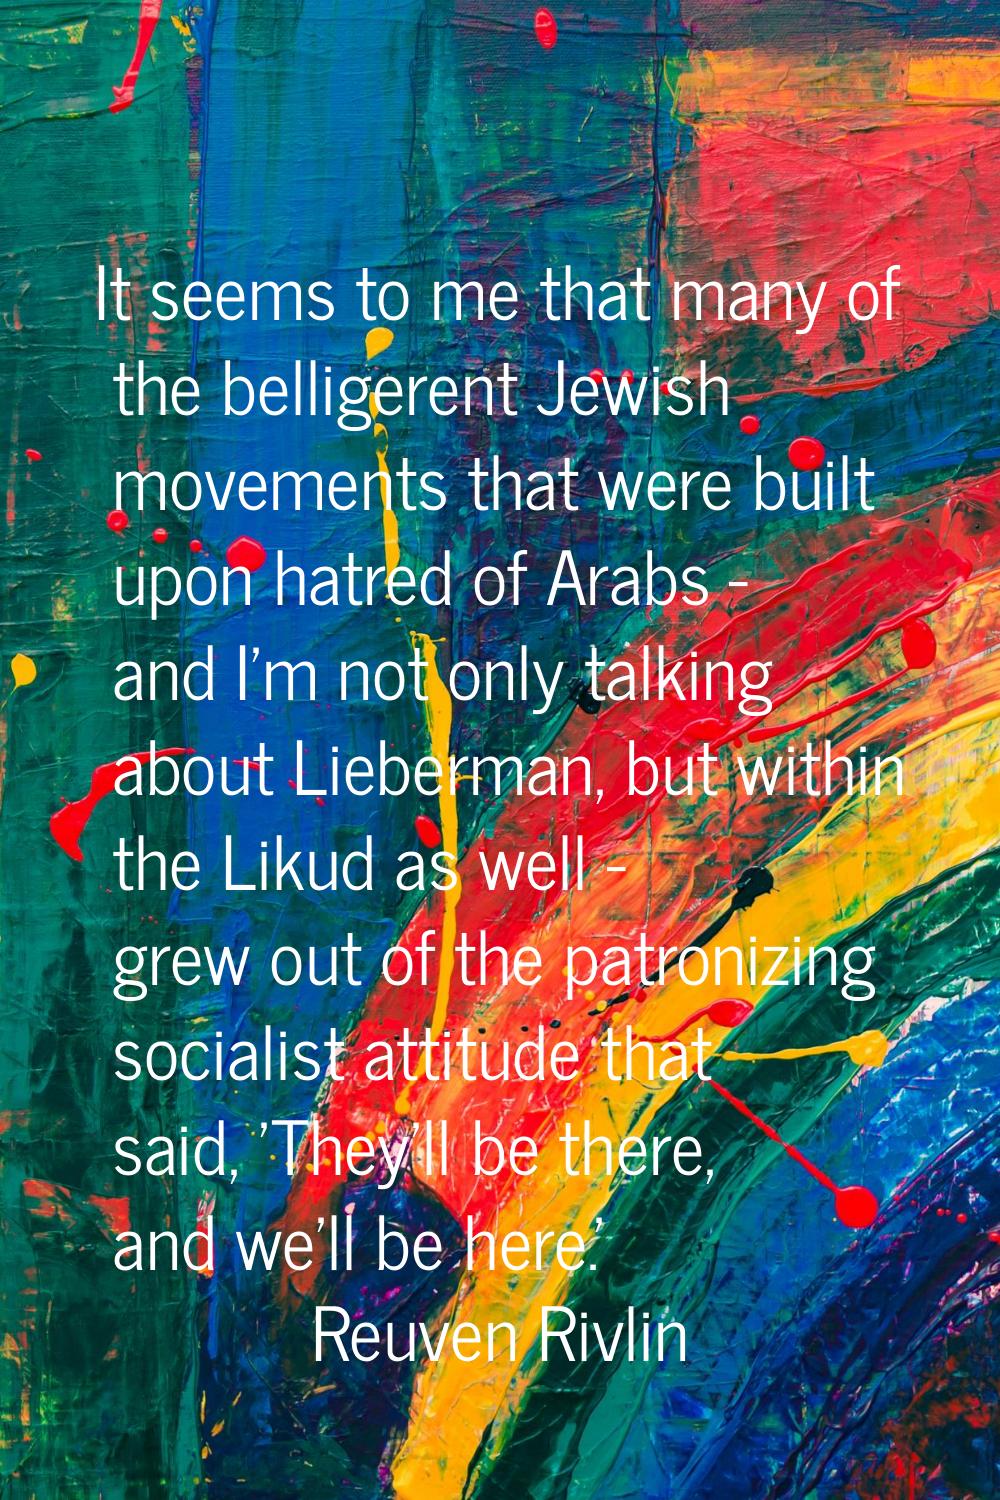 It seems to me that many of the belligerent Jewish movements that were built upon hatred of Arabs -